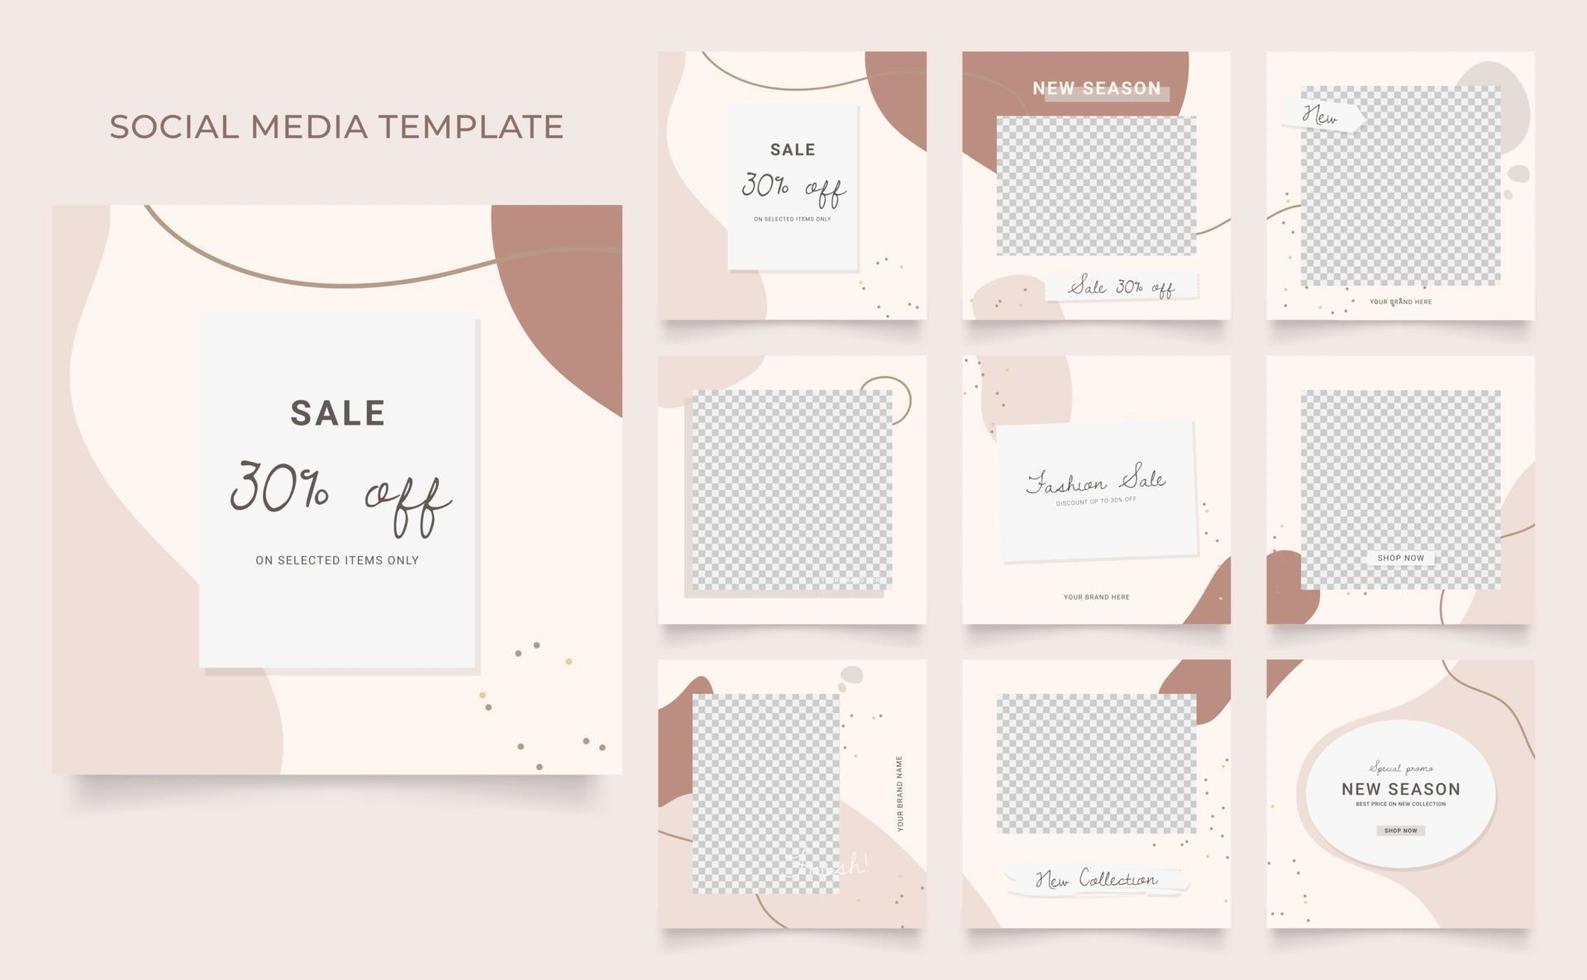 social media template banner blog fashion sale promotion. fully editable square post frame puzzle organic sale poster. brown beige vector background